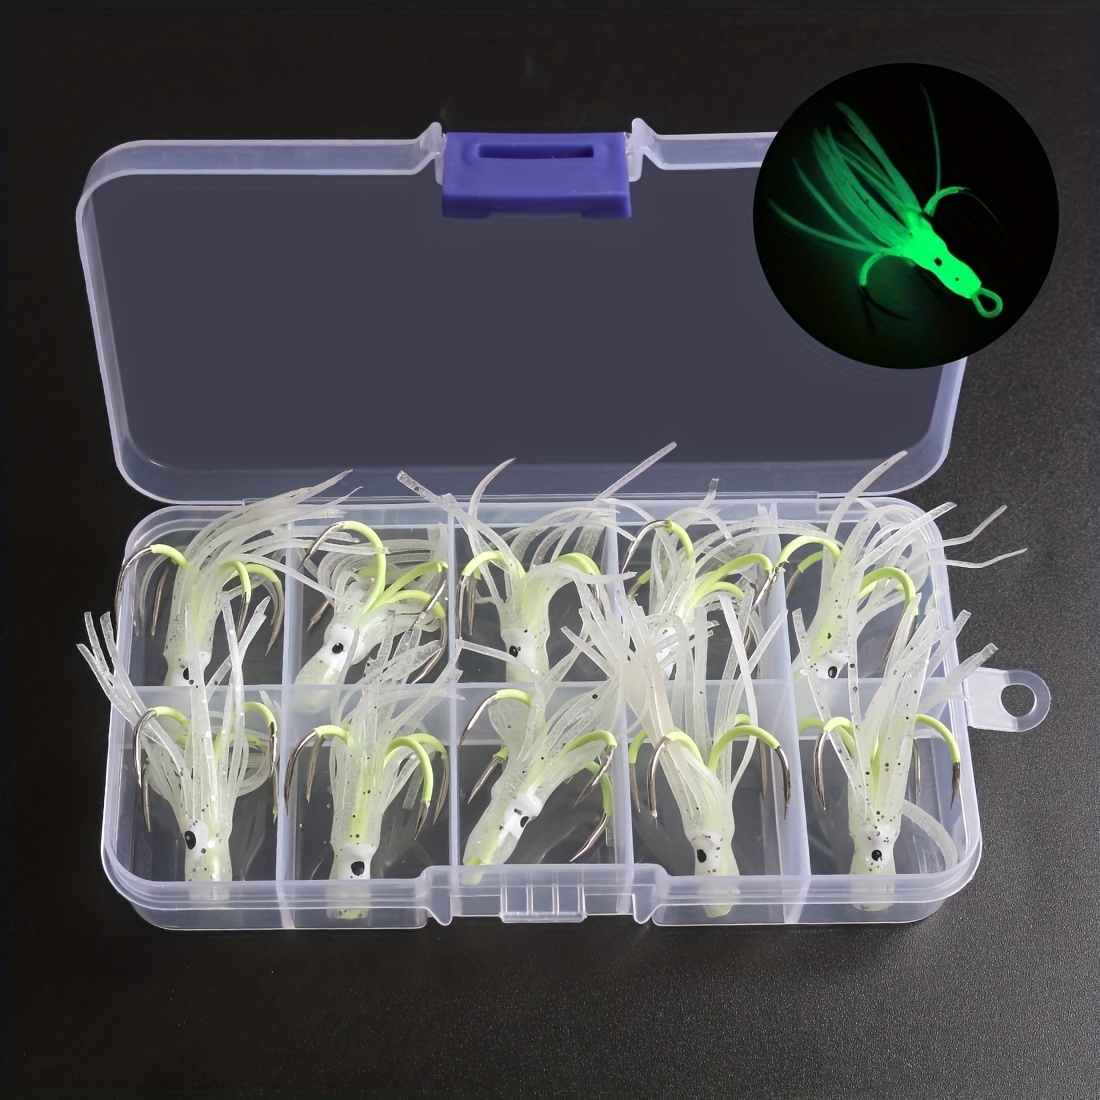 10pcs Luminous Sea Fishing Lure With Four Hooks Octopus Hook Squid Bait Hook For Boat Fishing